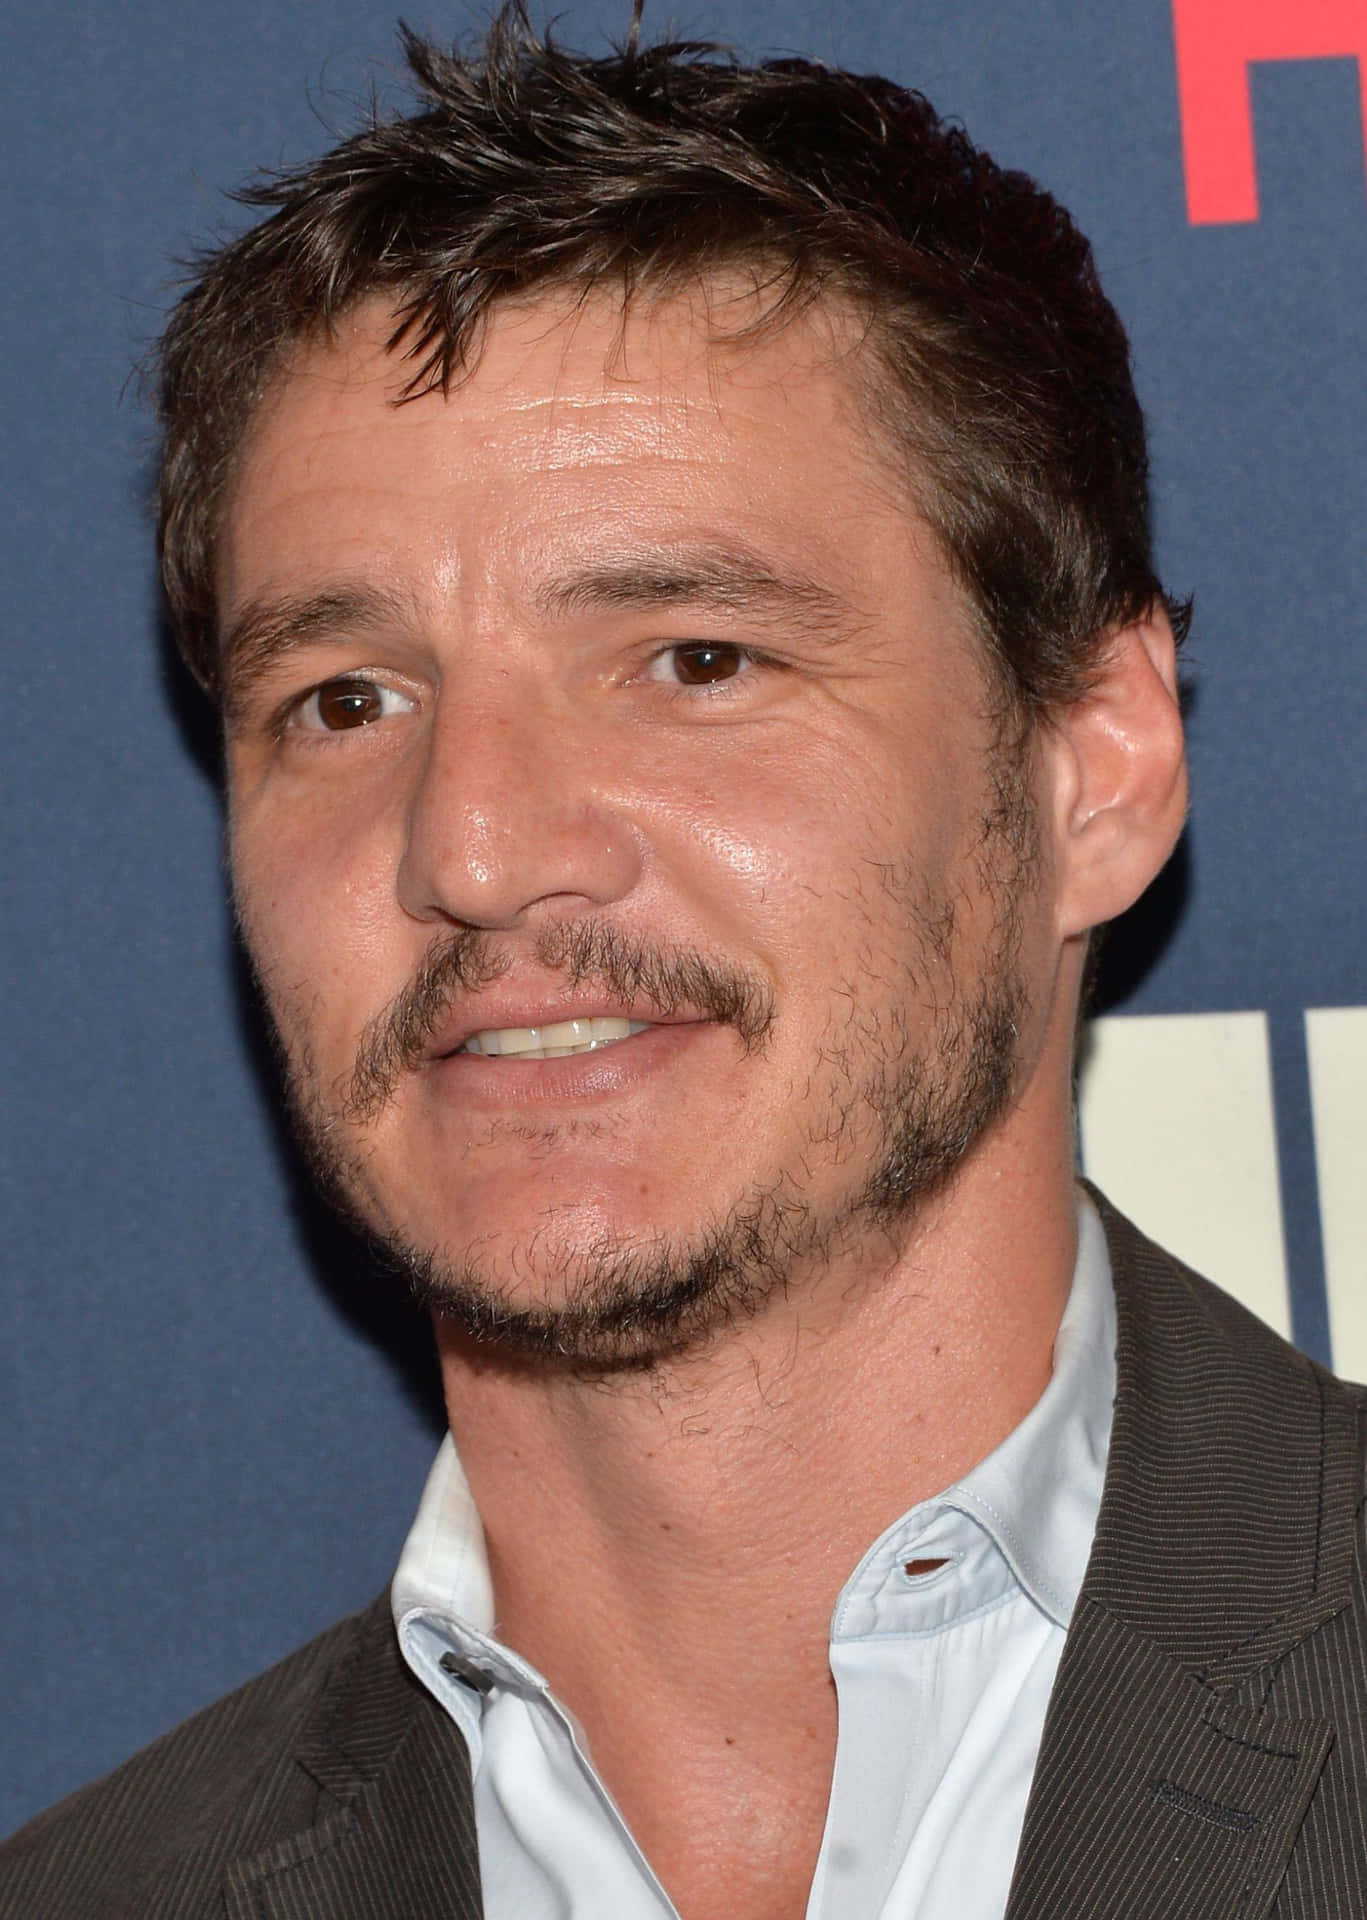 Pedro Pascal Event Appearance